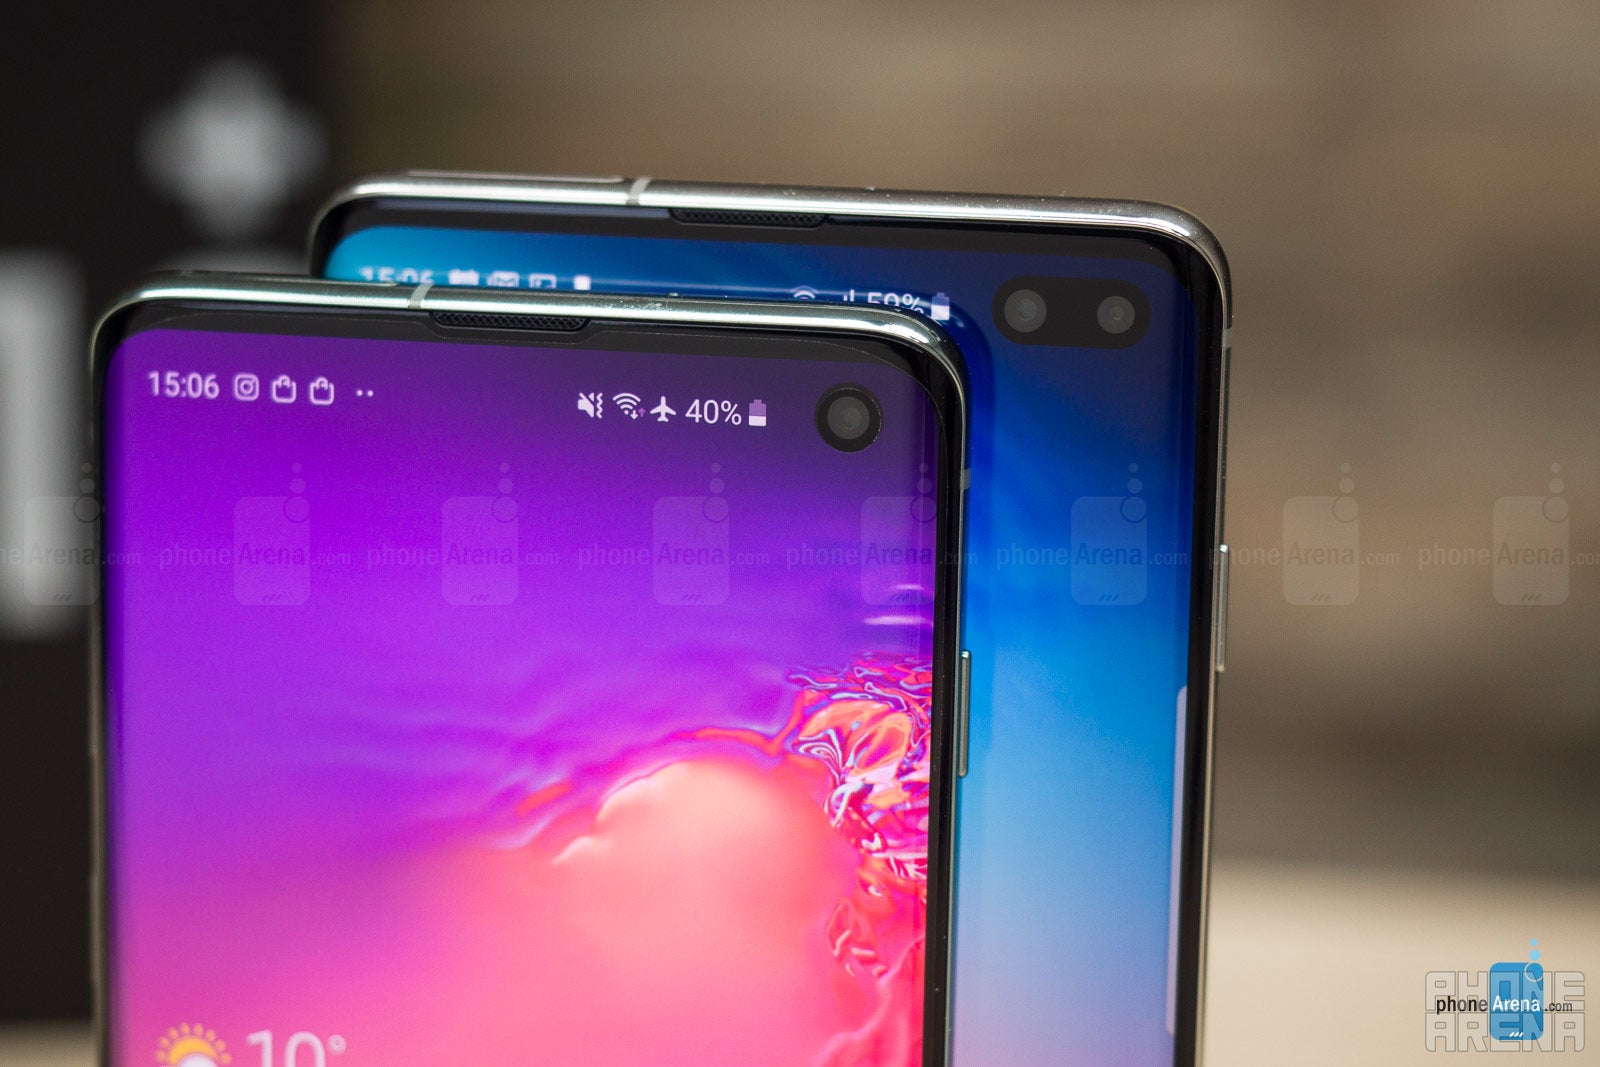 The Galaxy S10 &amp;amp; S10+ - Samsung's Galaxy S11 might skip the cool design everyone wants